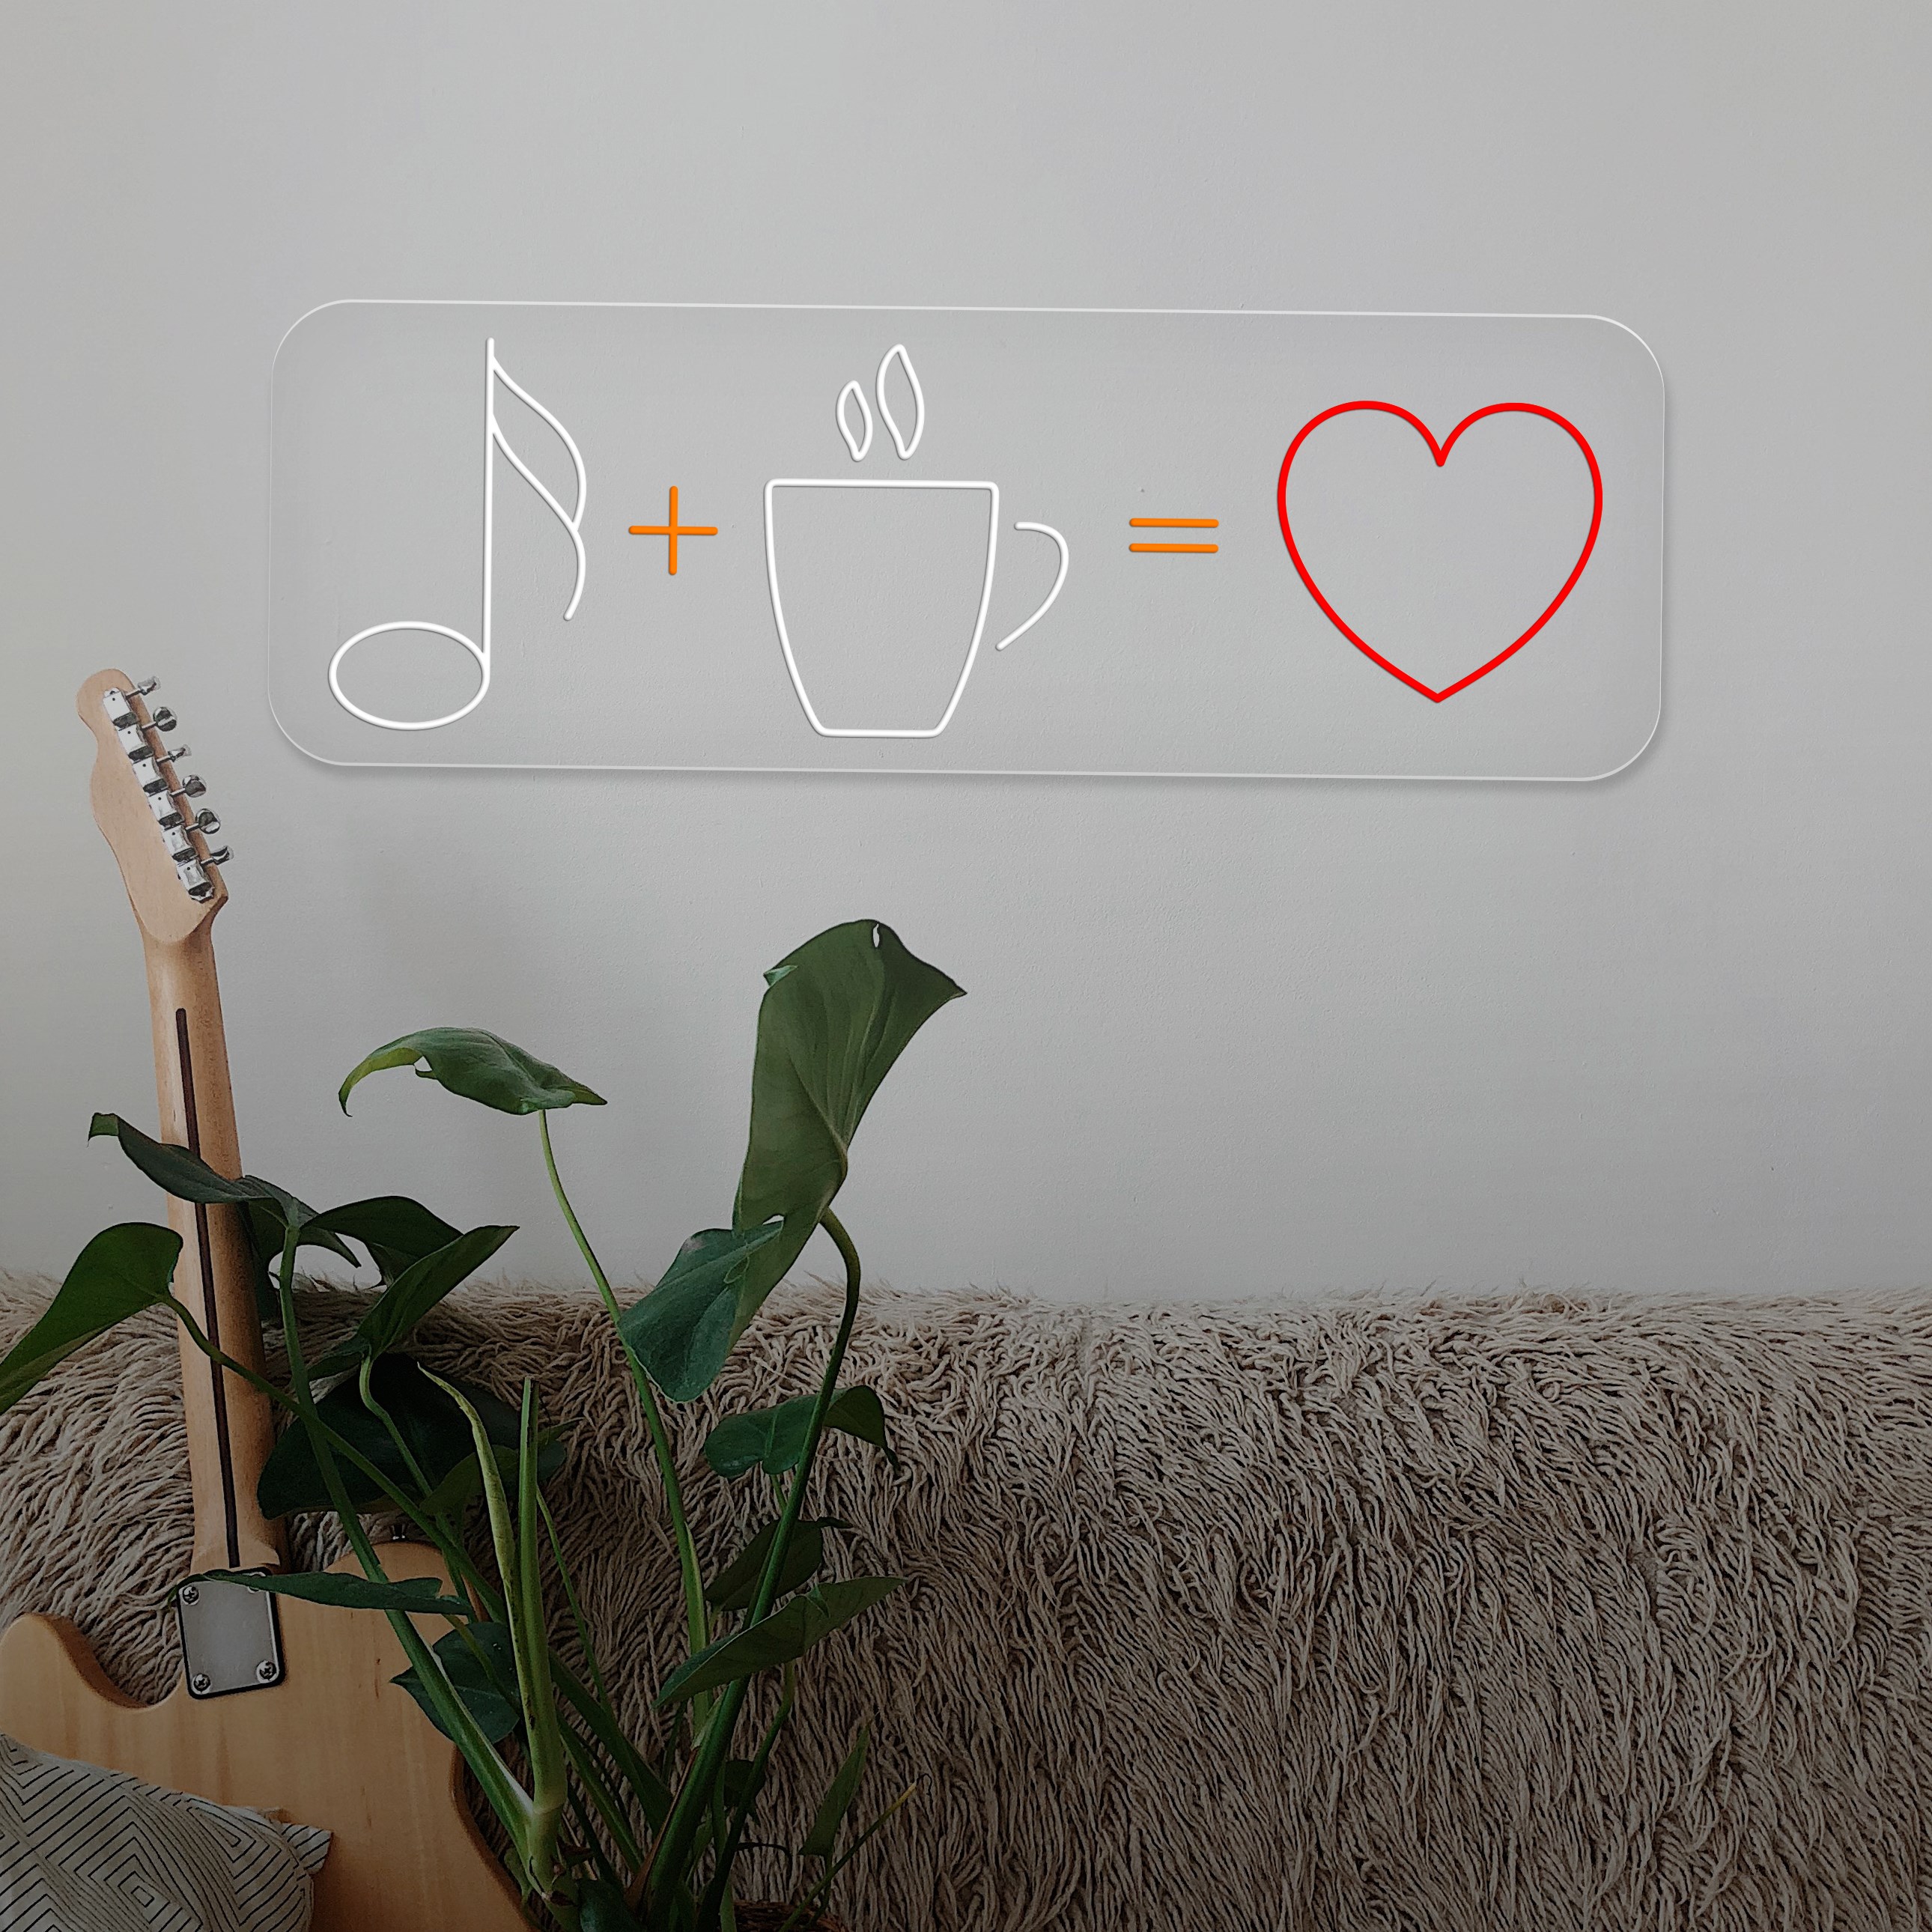 Picture of "Coffee + Music = Love" Neon Sign